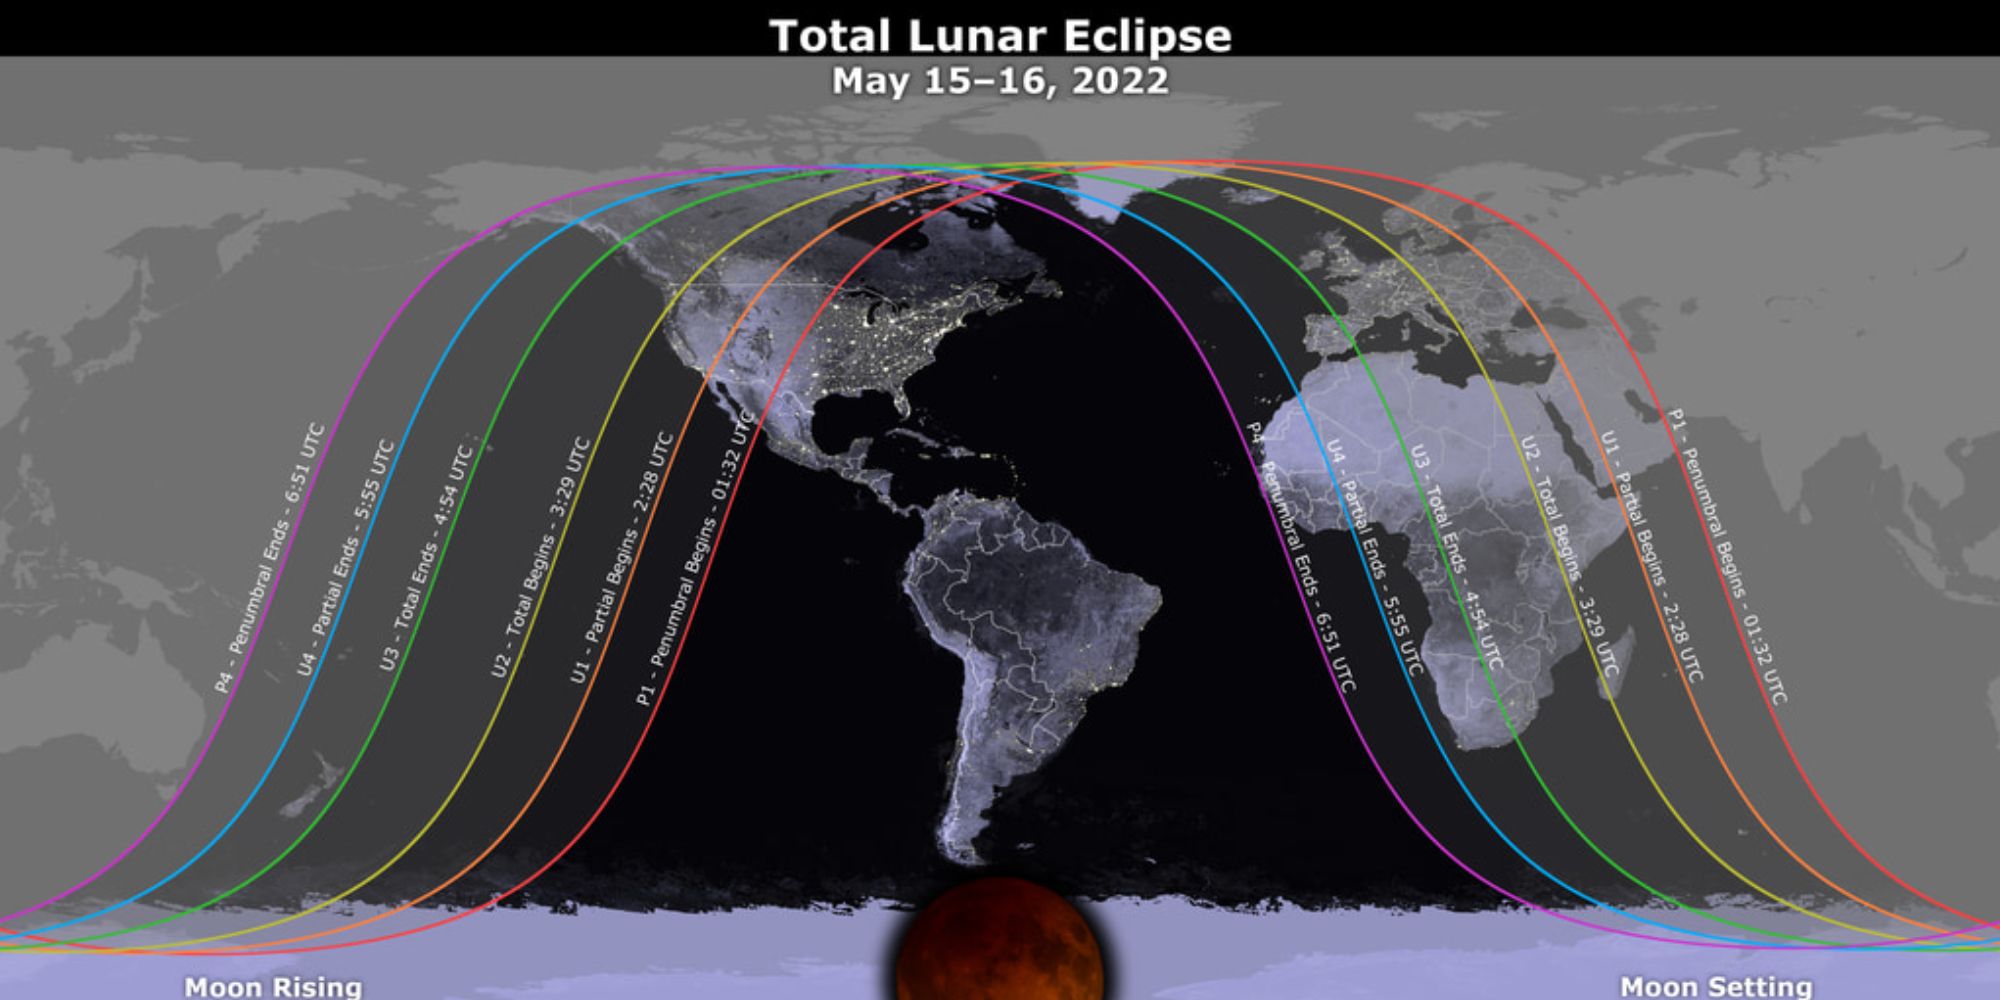 A map showing the stages of the total lunar eclipse happening in May 2022